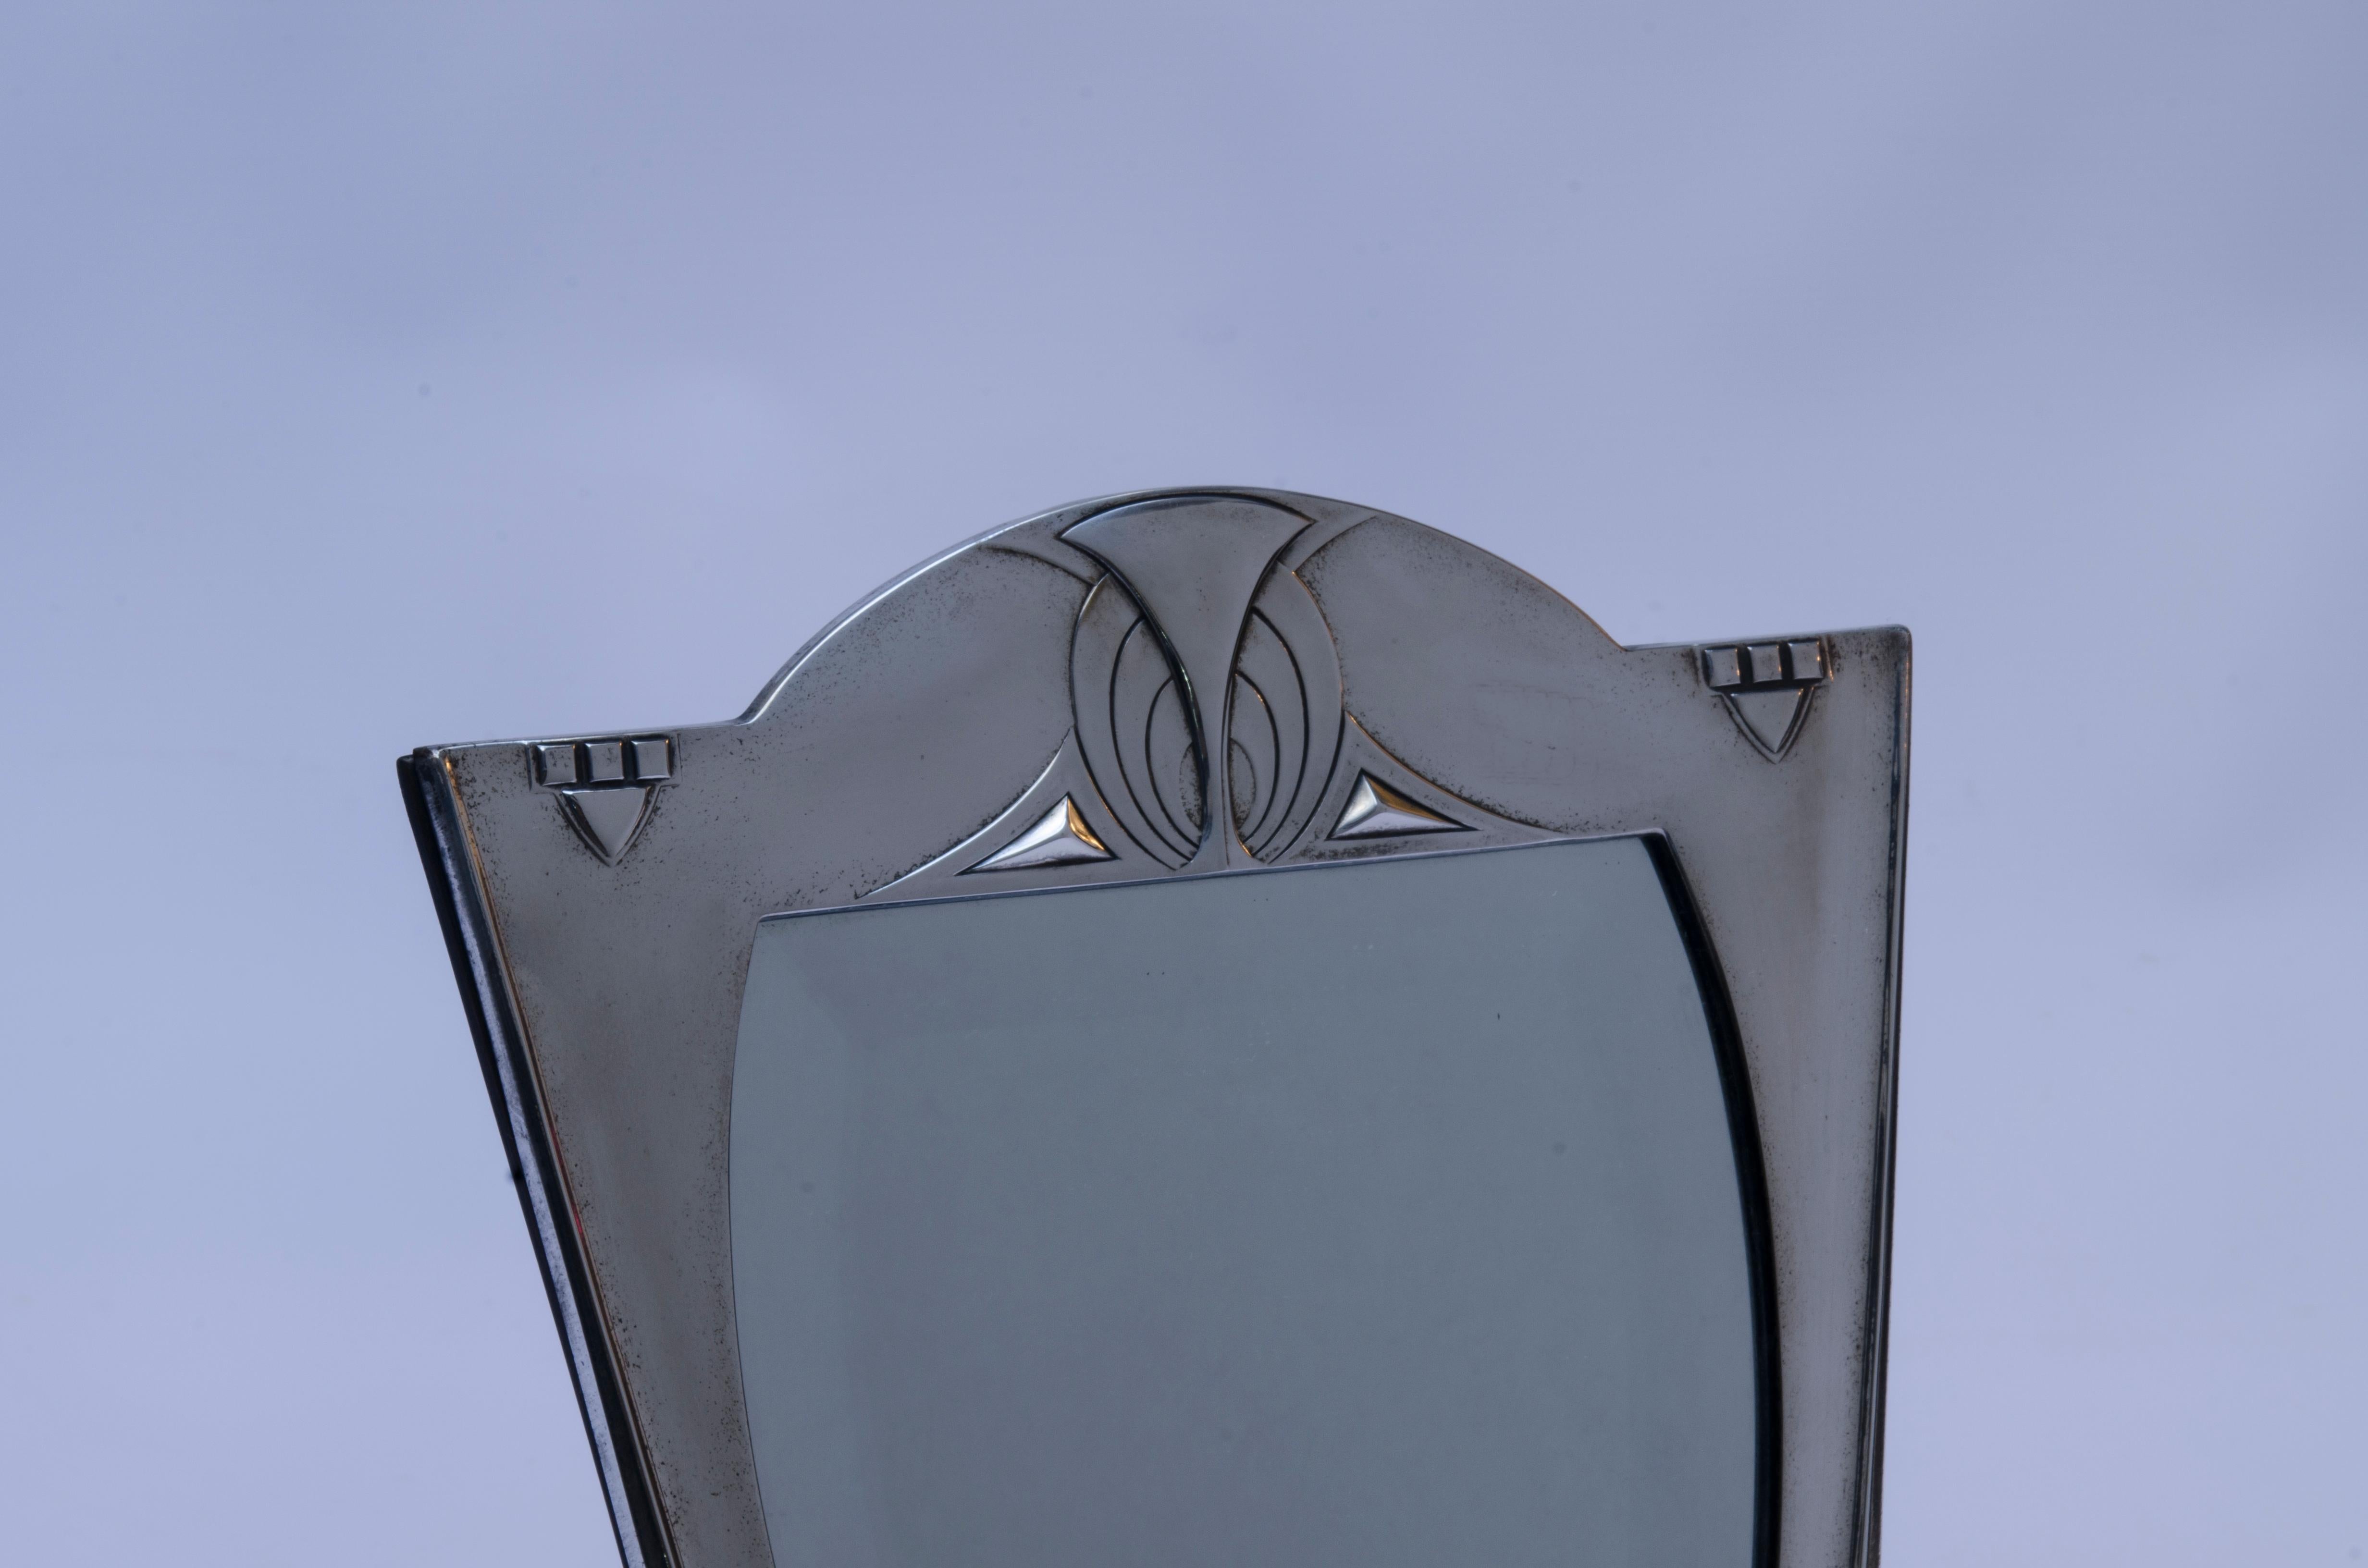 “Model 84” toilet mirror made of silver-plated bronze and beveled mirror, manufactured by WMF- Württembergische Metallwarenfabrik (1853 to the present). Signed WMF with ostrich, ace, I/0.

Germany, CIRCA 1900.

Graham Dry (1906), “Art Nouveau